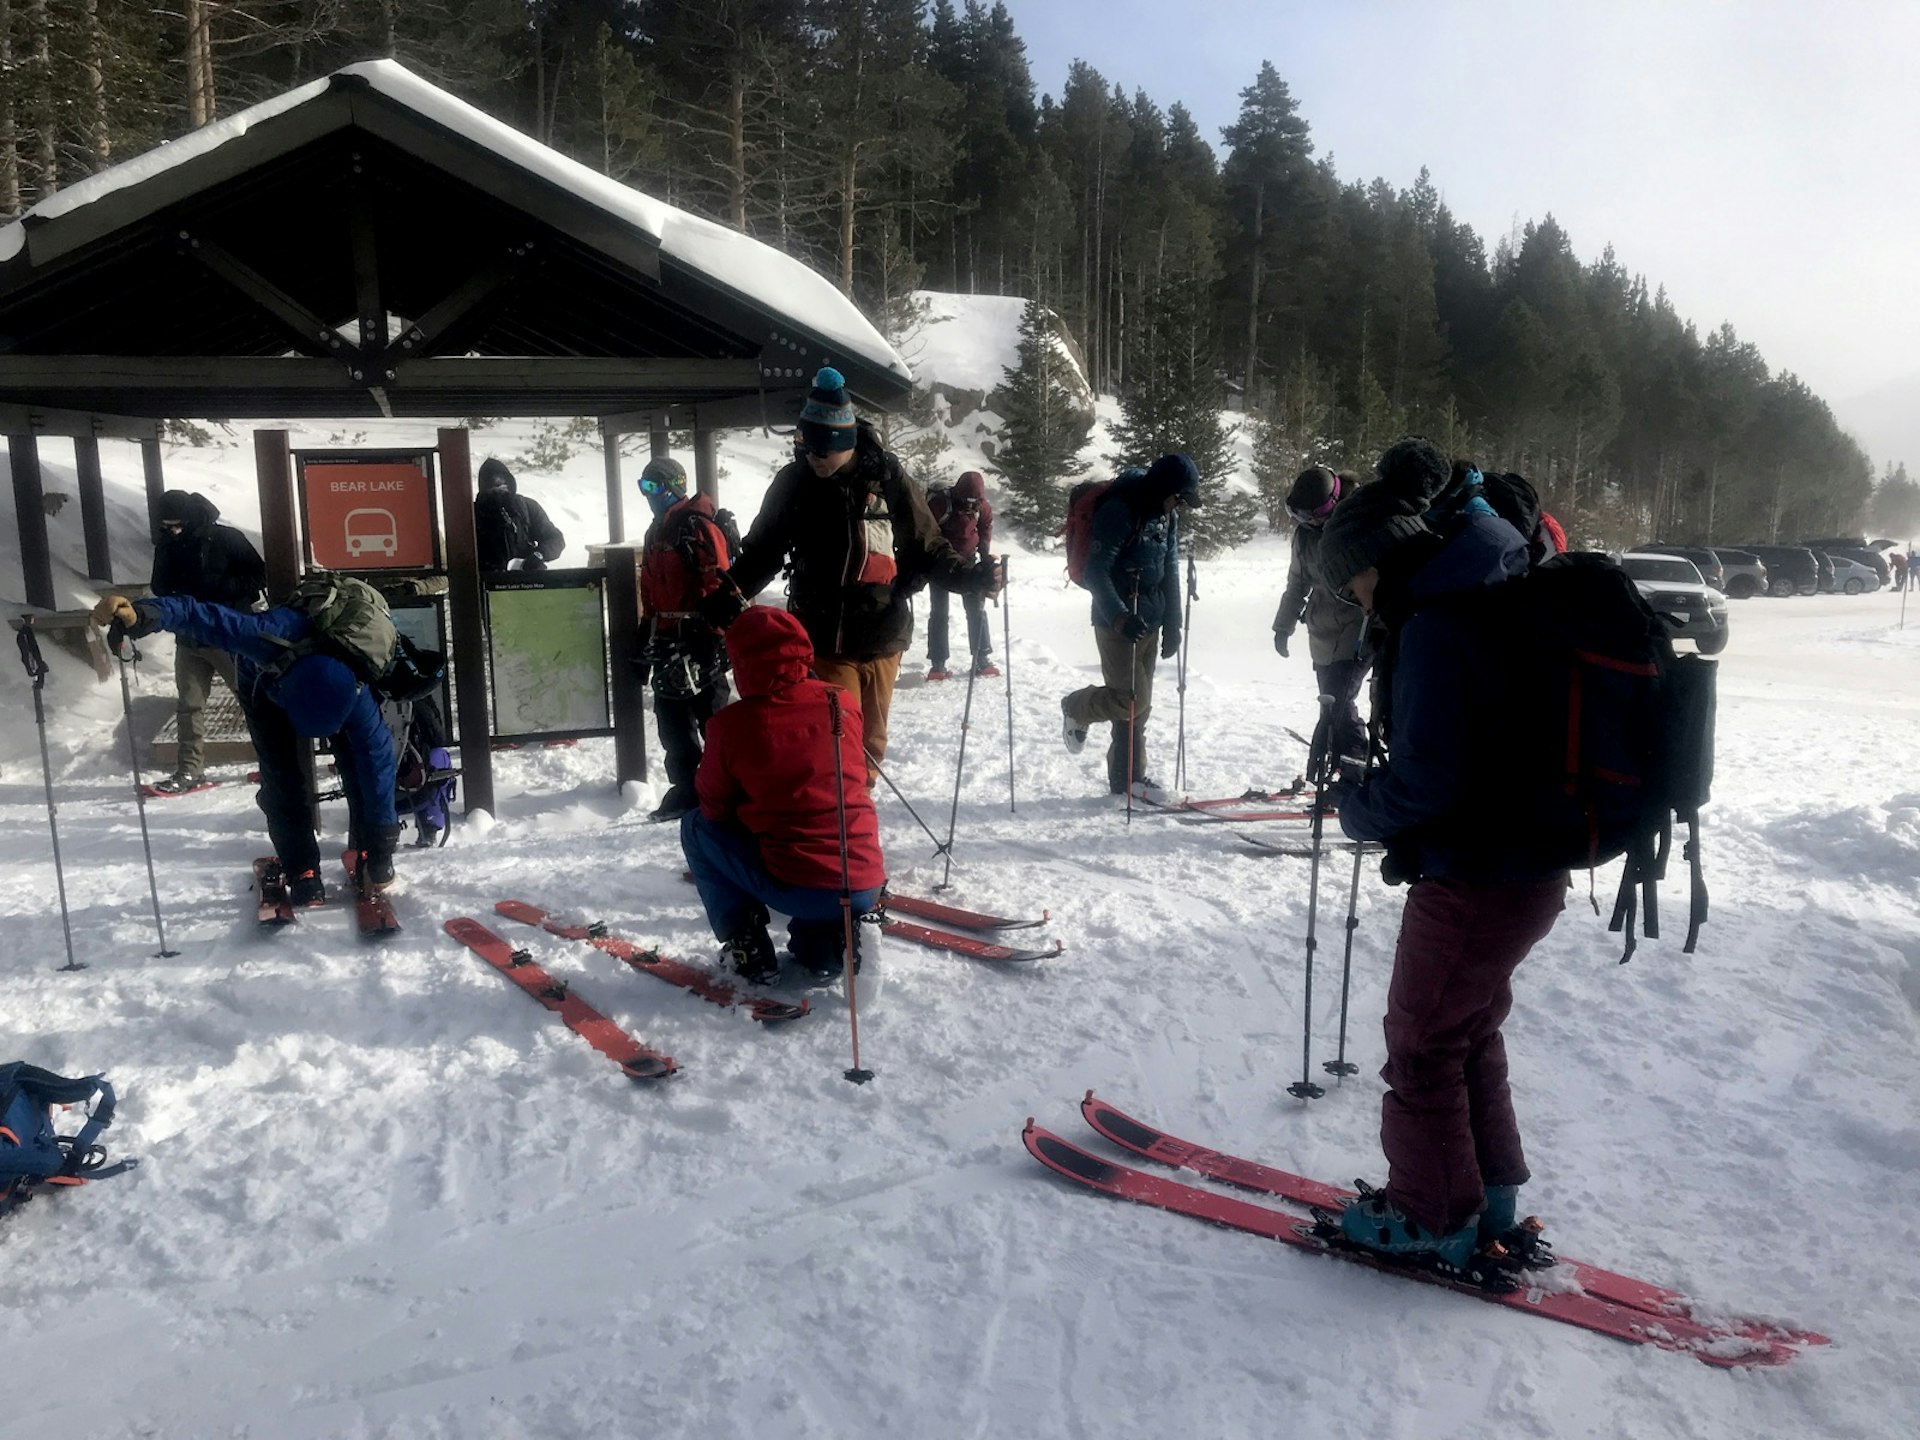 Skiiers get geared up for a backcountry excursion at a trailhead in the park